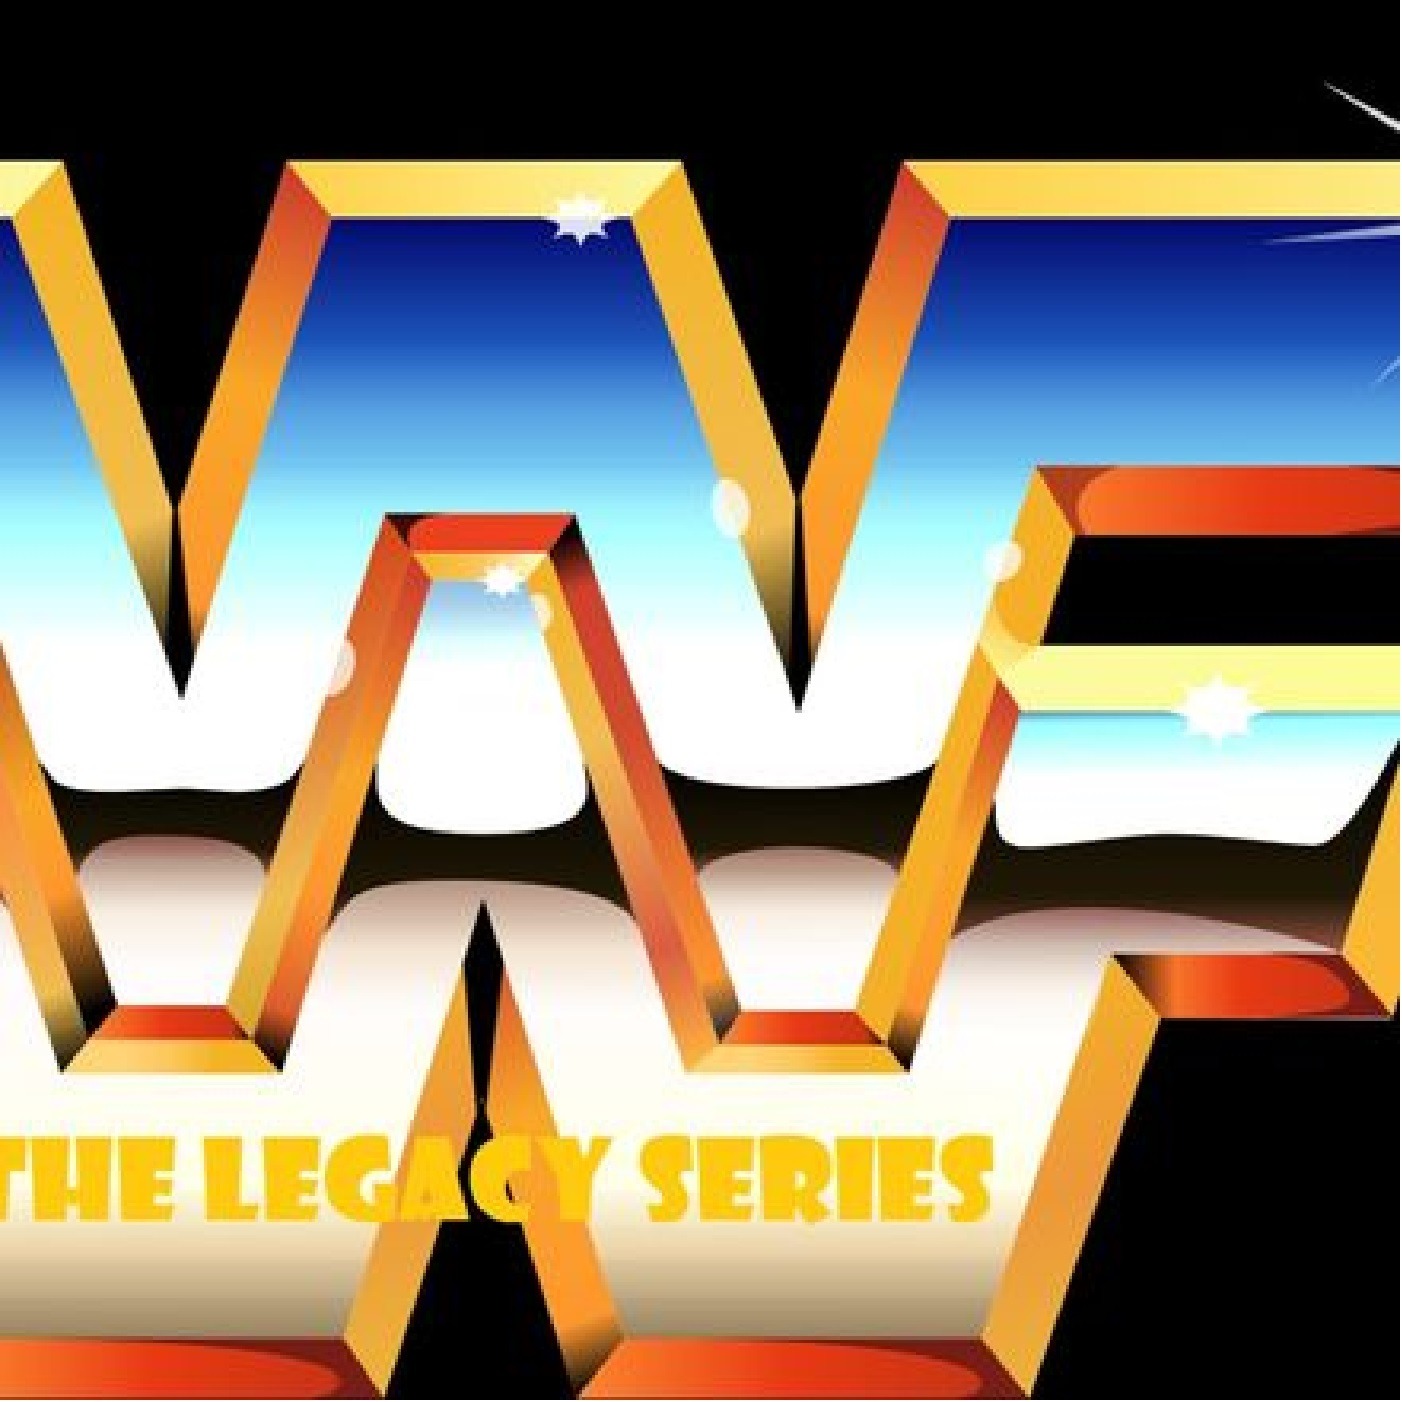 WWF: The Legacy Series - This Tuesday in Texas